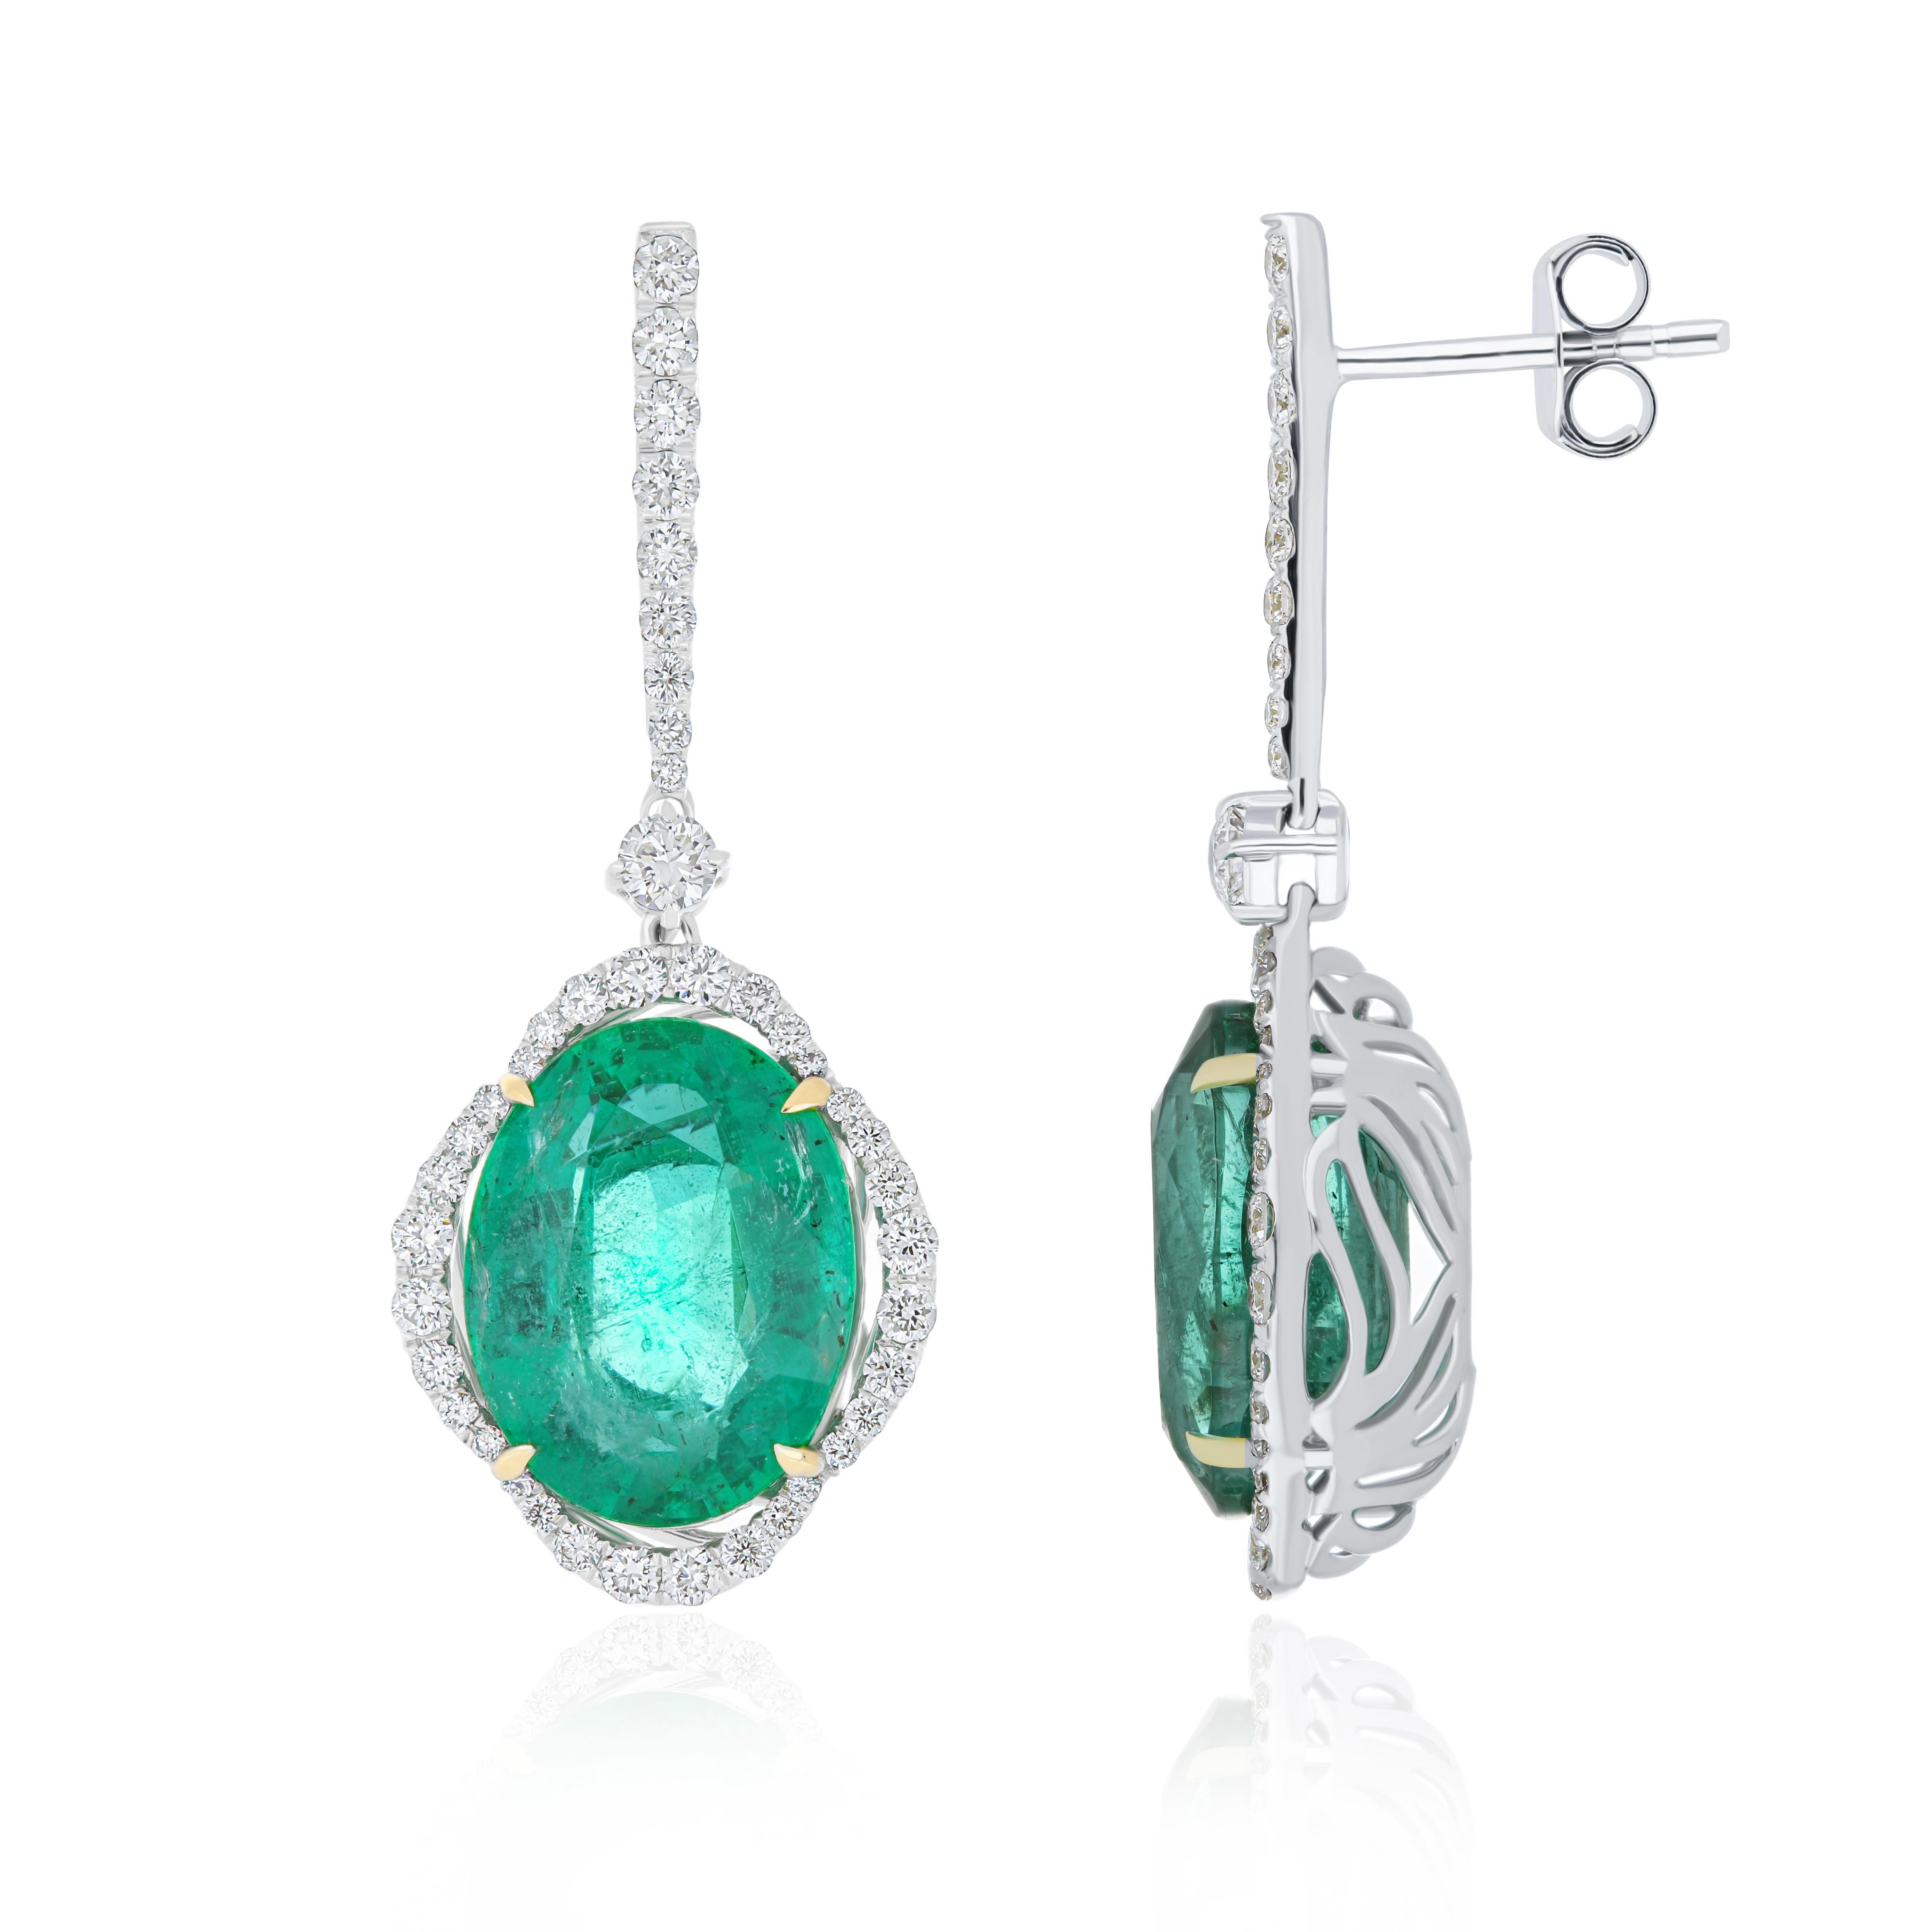 Elegant and Exquisitely detailed White Gold earrings, with 9.3 Cts. (total approx.) Emerald cut in Unique Oval Shape accented with micro pave Diamonds, weighing approx. 0.9cts. (total approx.). total carat weight. Beautifully Hand-Crafted Earring in